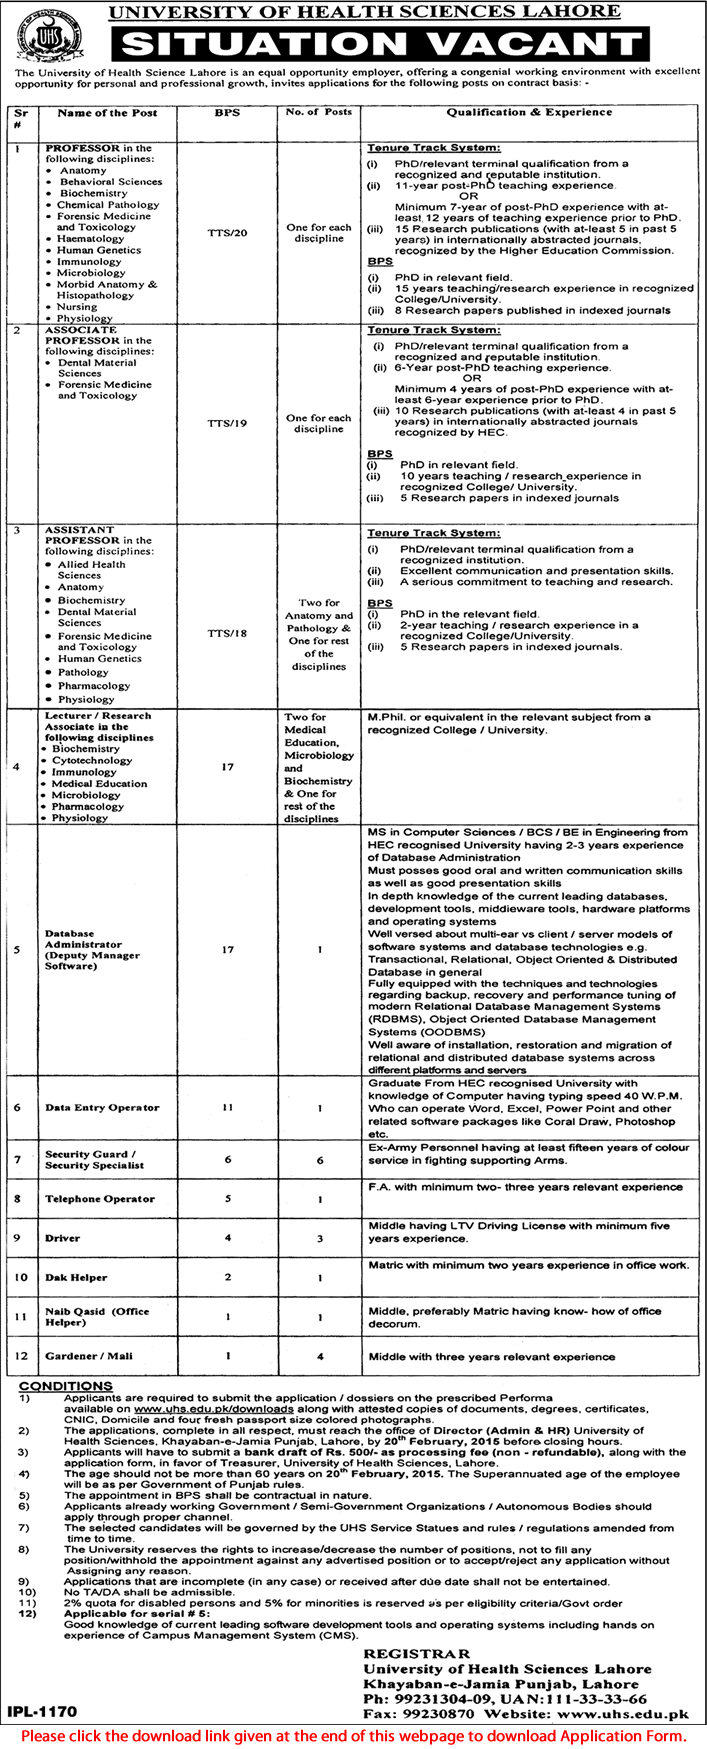 University of Health Sciences Lahore Jobs 2015 February Application Form for Faculty & Admin Staff